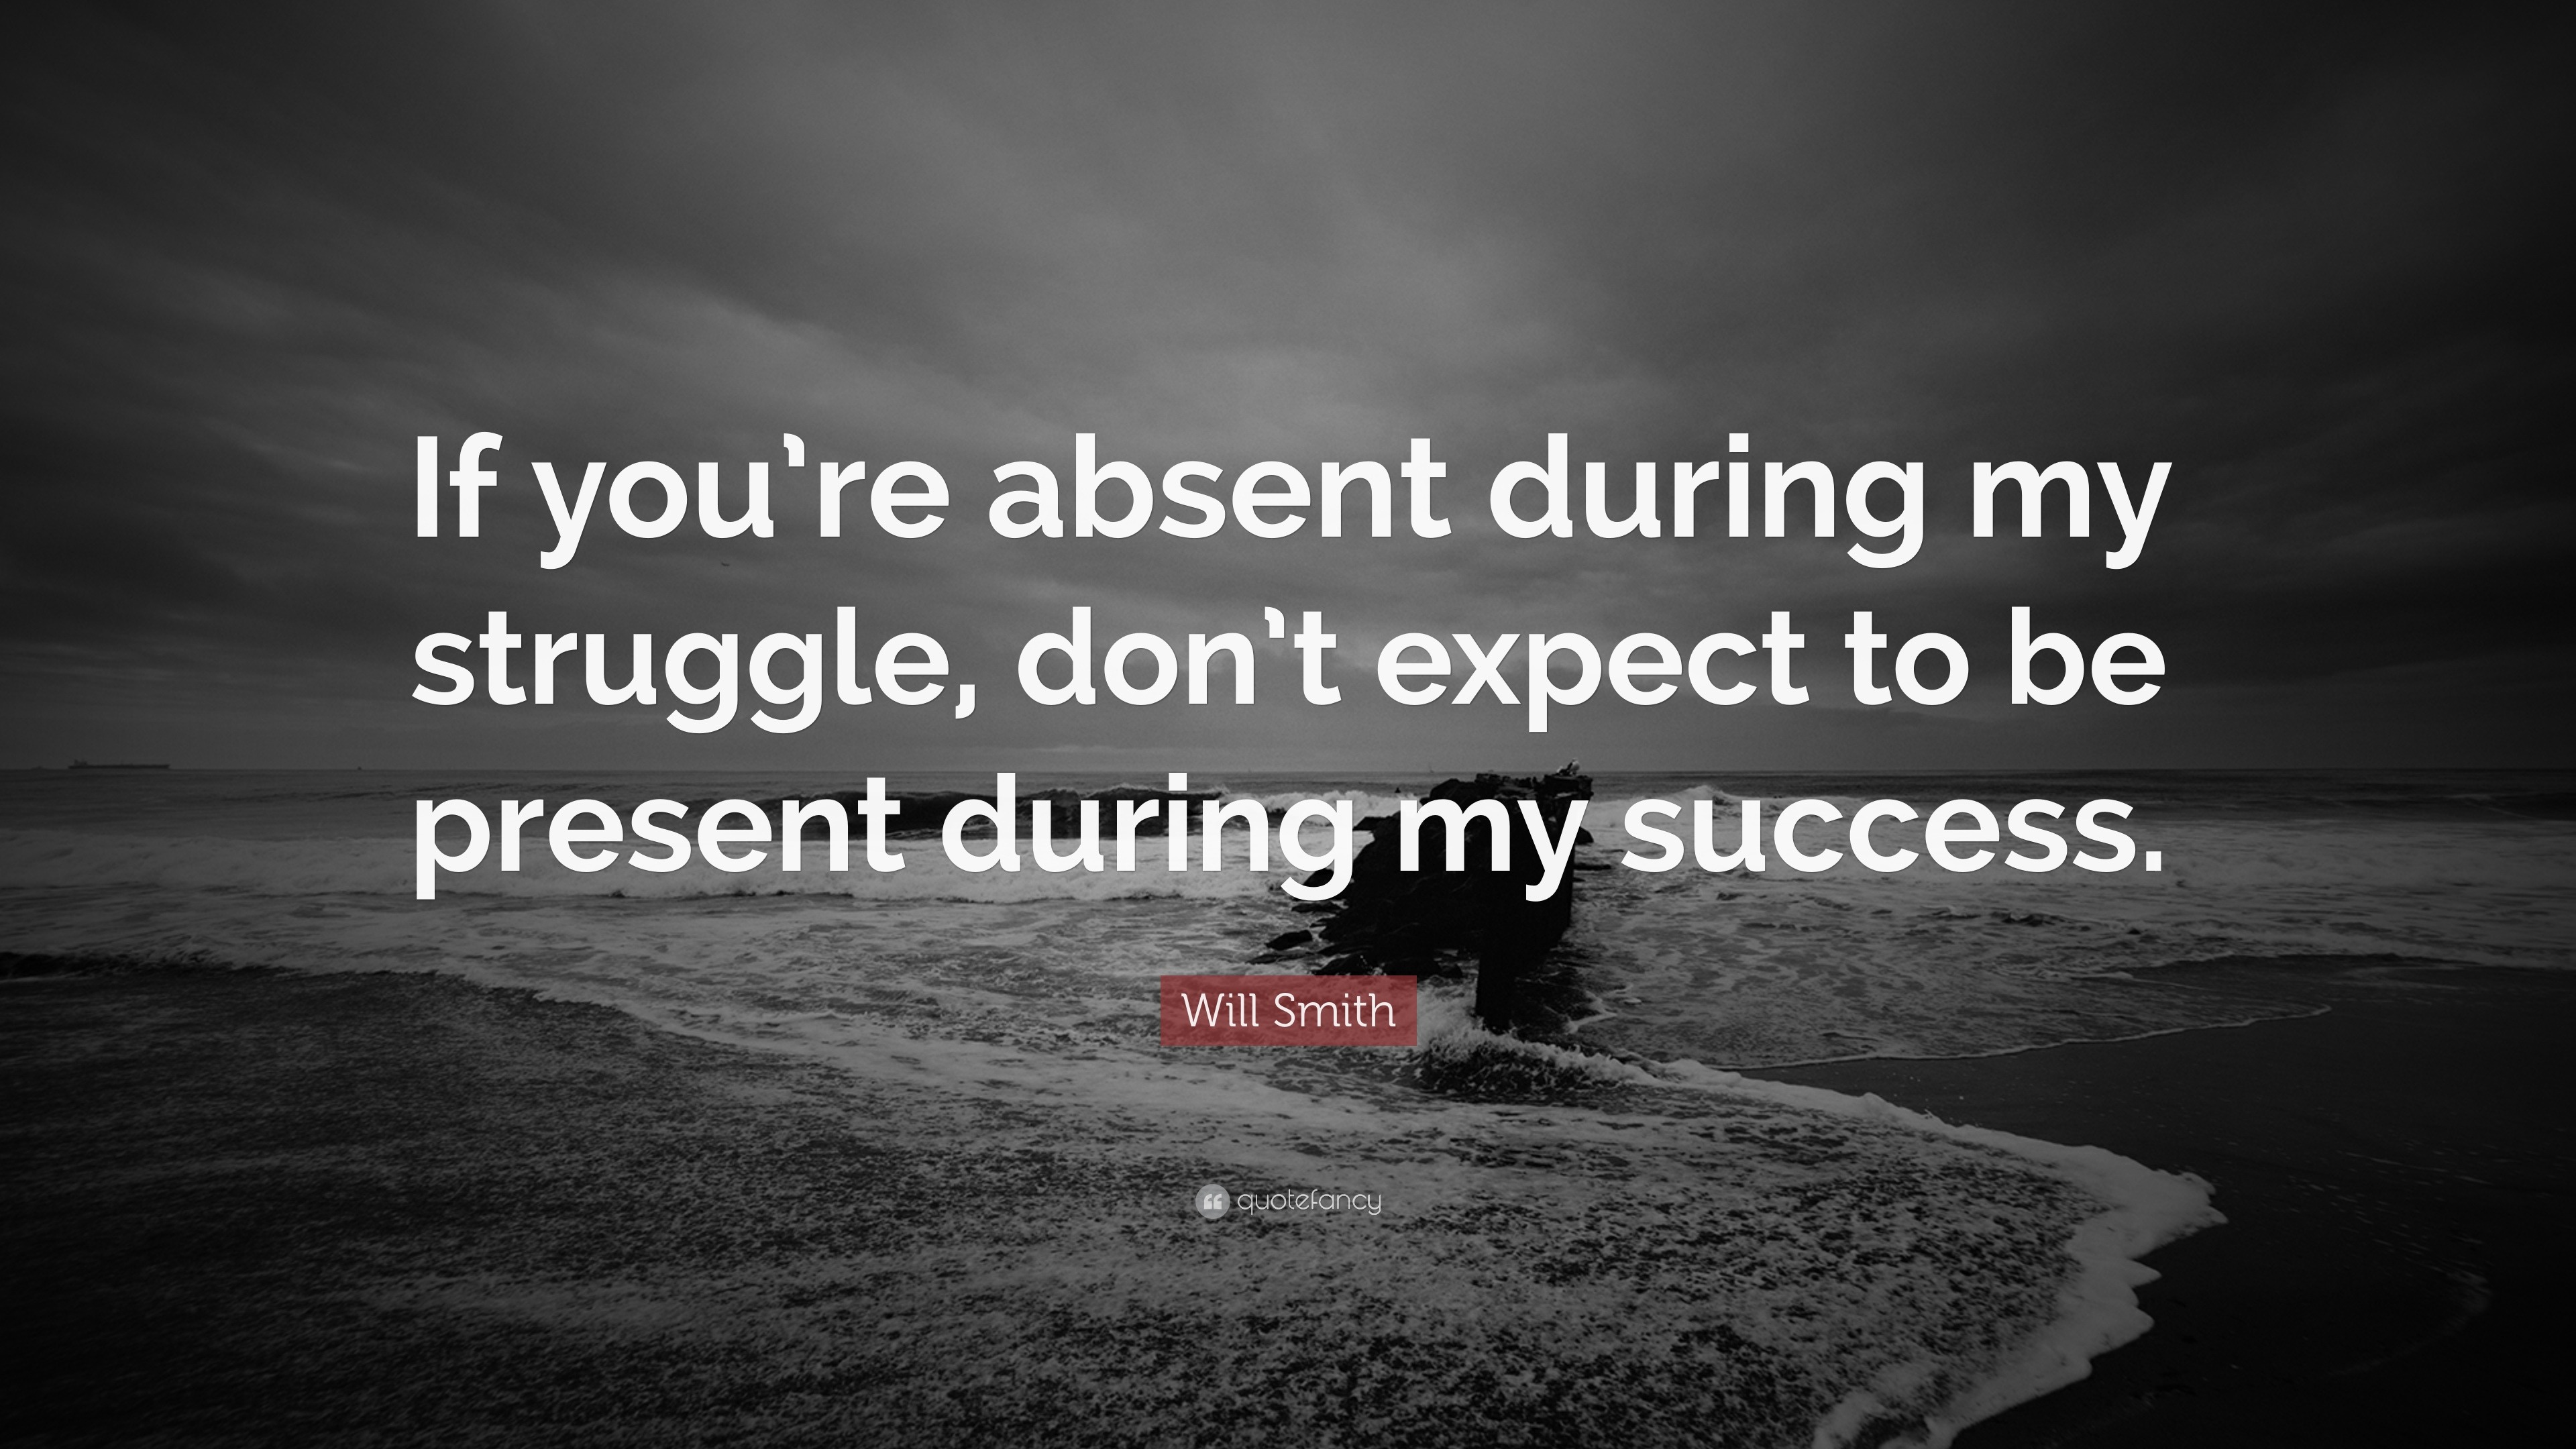 Will Smith Quote - If you're absent during my struggle, don't expect to be present during my success.